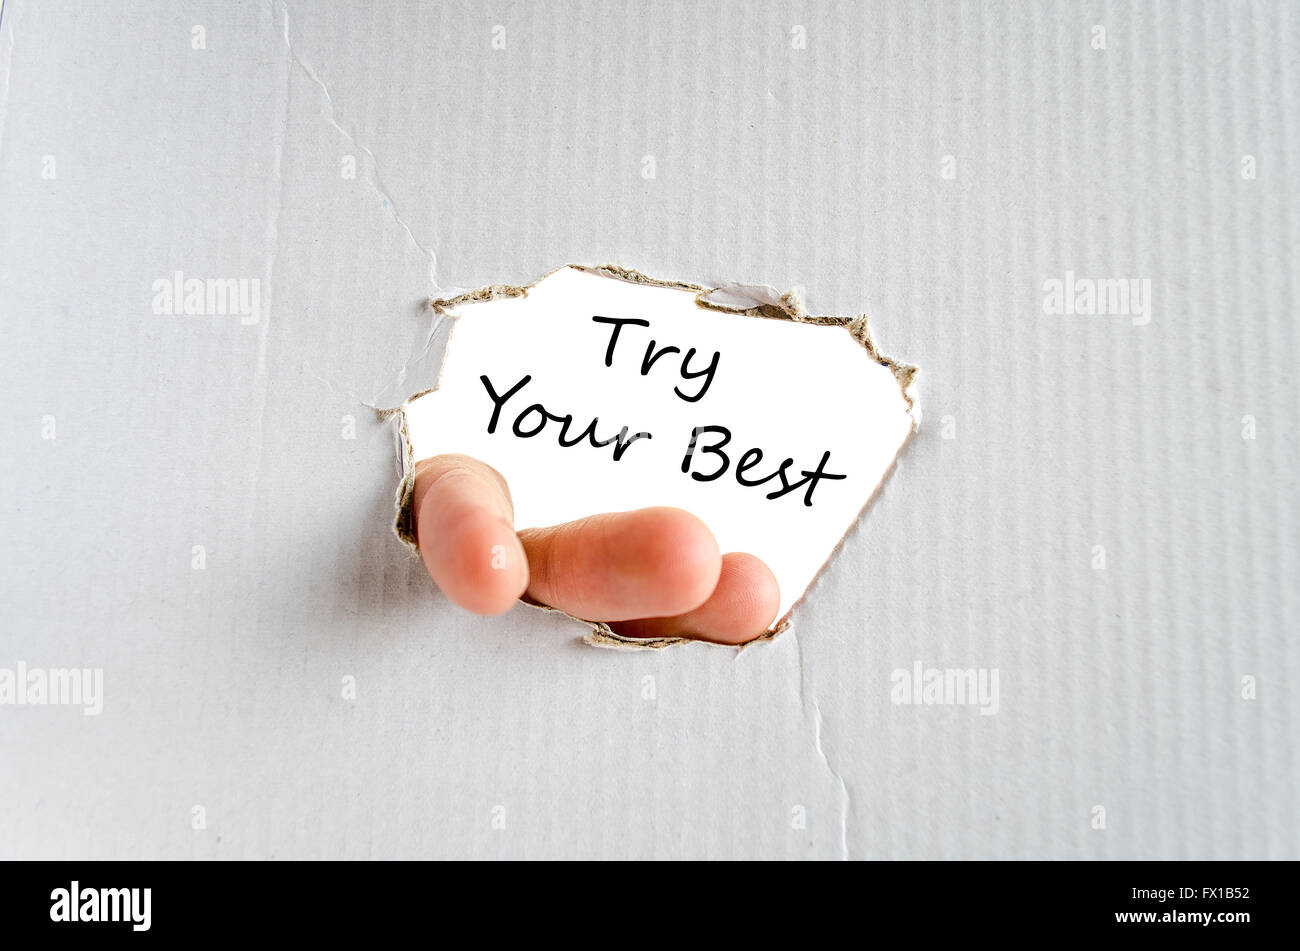 Try your best text concept isolated over white background Stock Photo